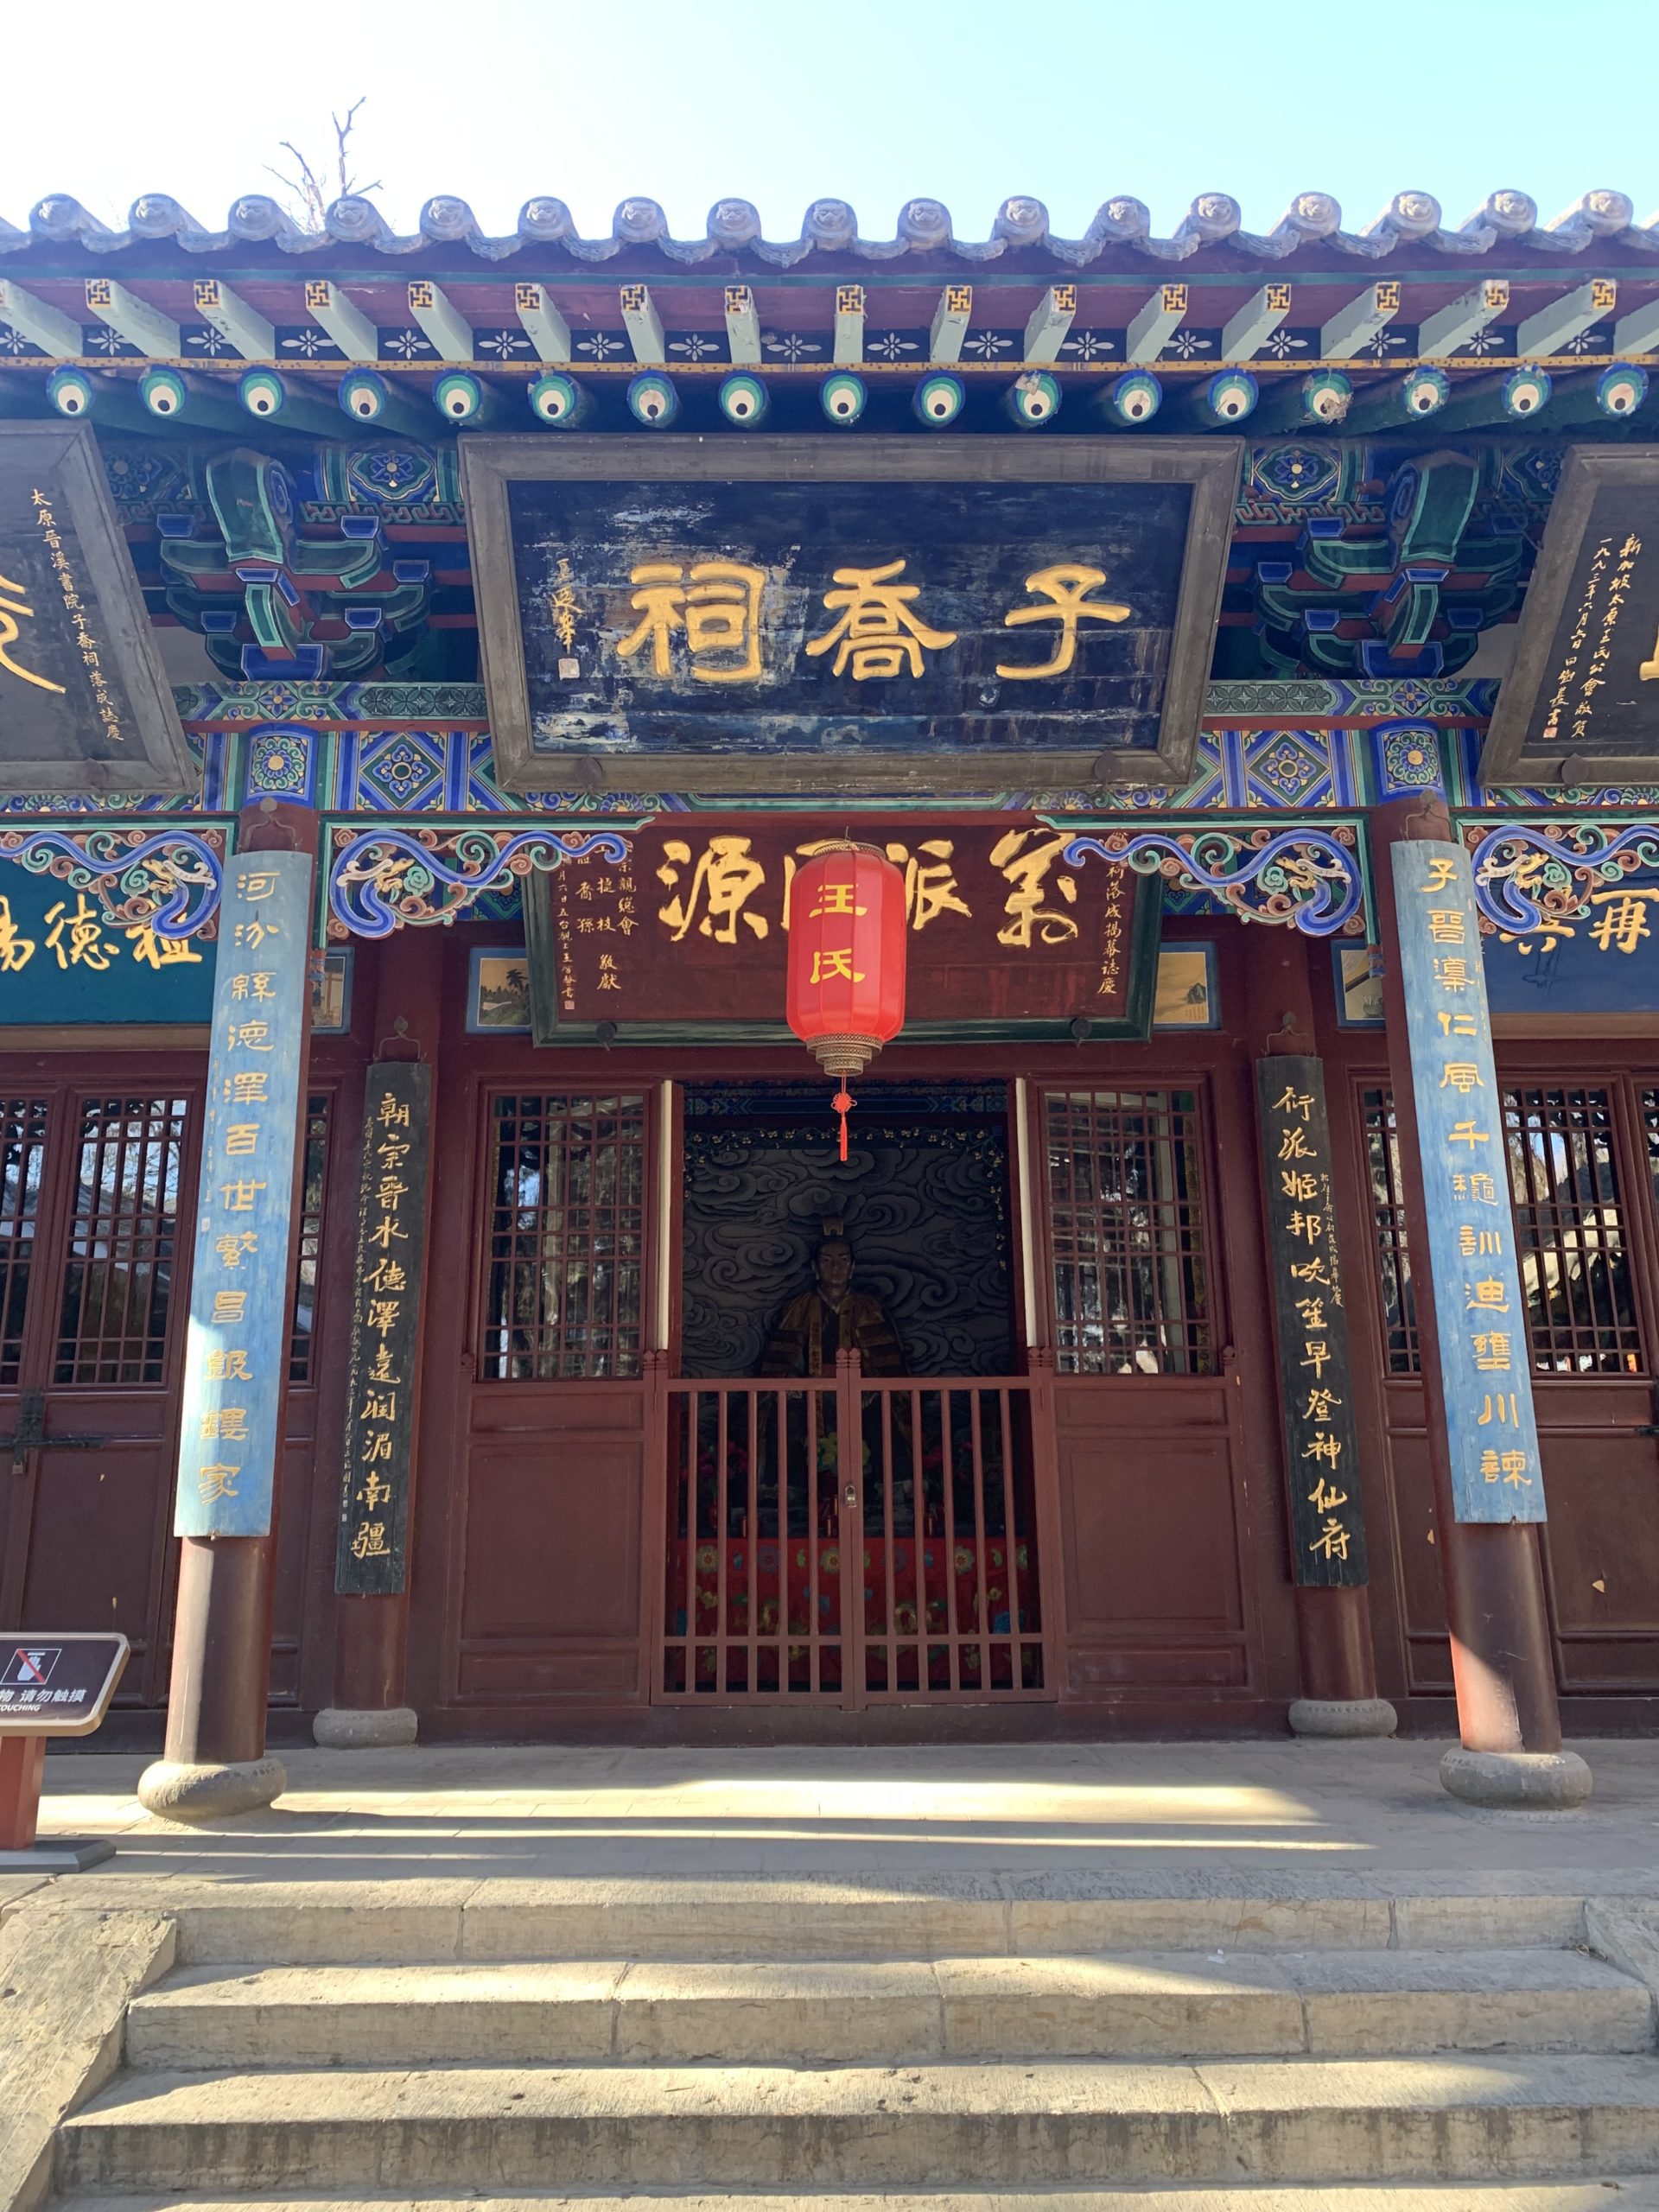 The Ziqiao Temple in the Jin Temple in Taiyuan is the ancestor of the Wang family: Wang Ziqiao.